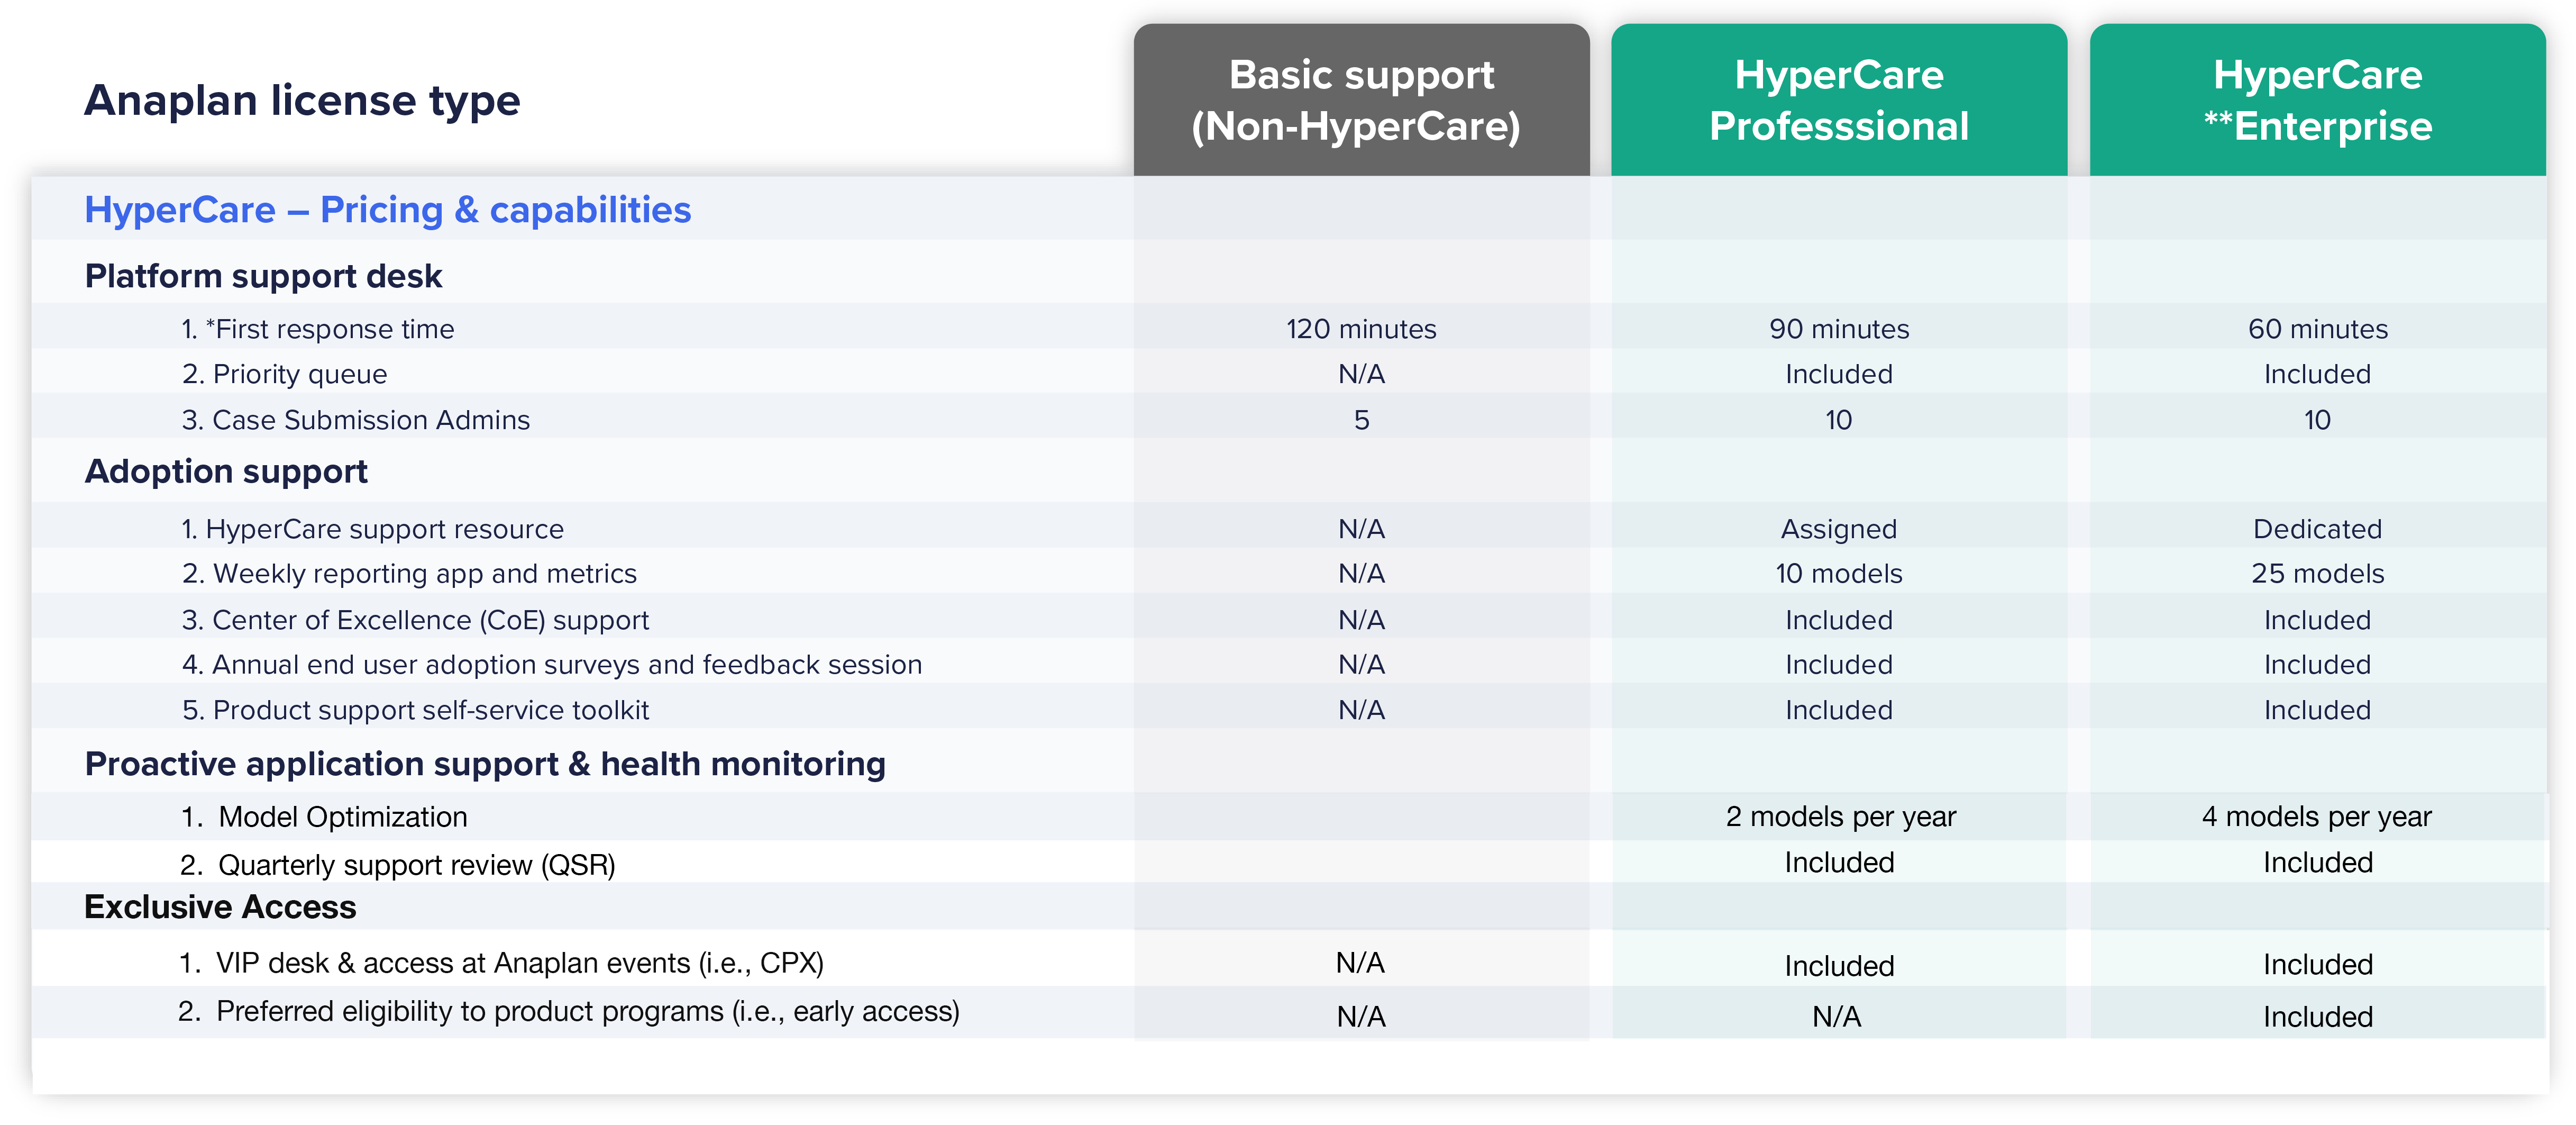 HyperCare pricing and capabilities table chart